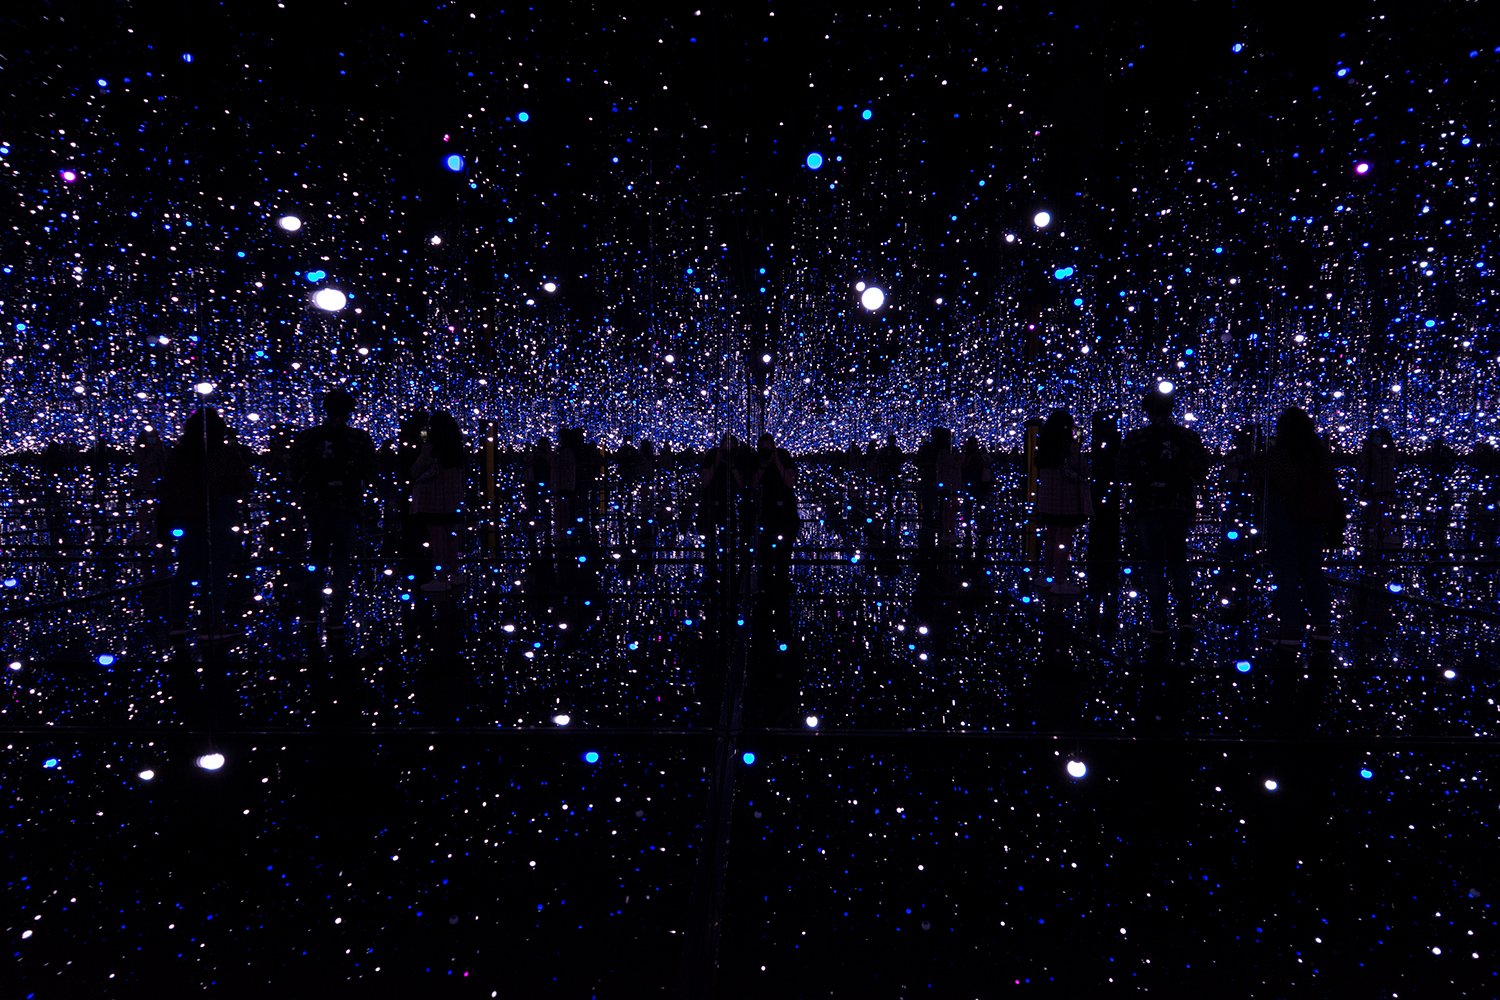 lee-mundy-yayoi-kusama-infinity-mirror-rooms-at-tate-modern-30-july-2021-filled-with-the-brilliance-of-life-2011-2017-0048-w-1500px.jpg